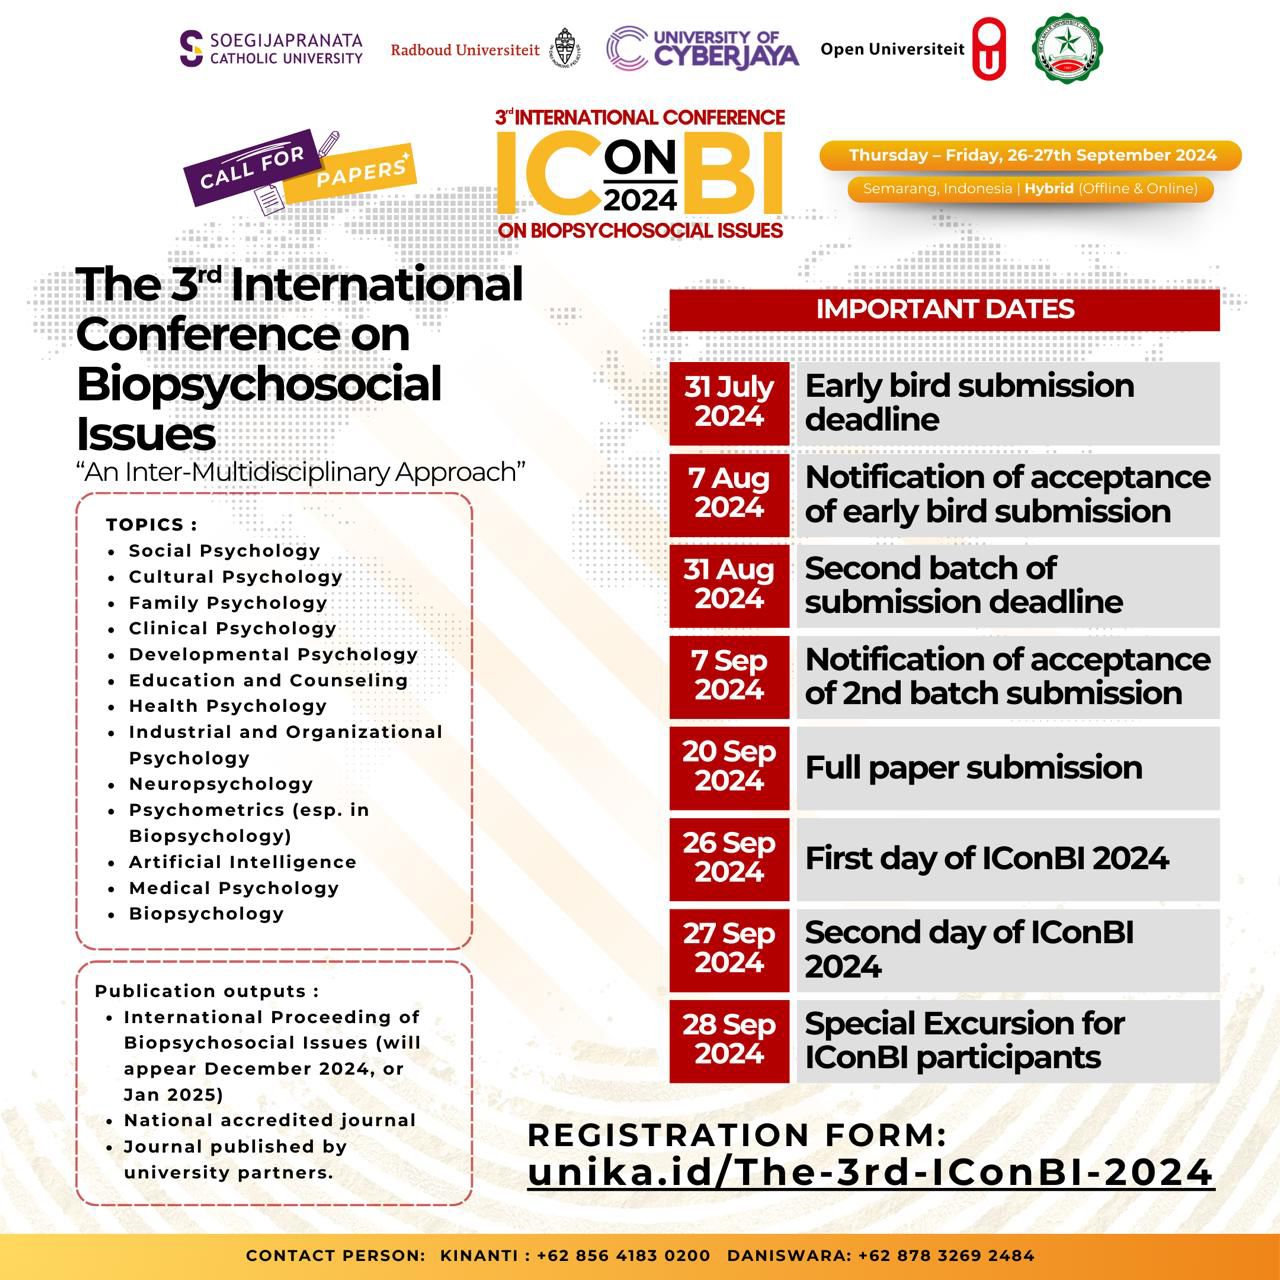 The 3rd International Conference on Biopsychosocial Issues